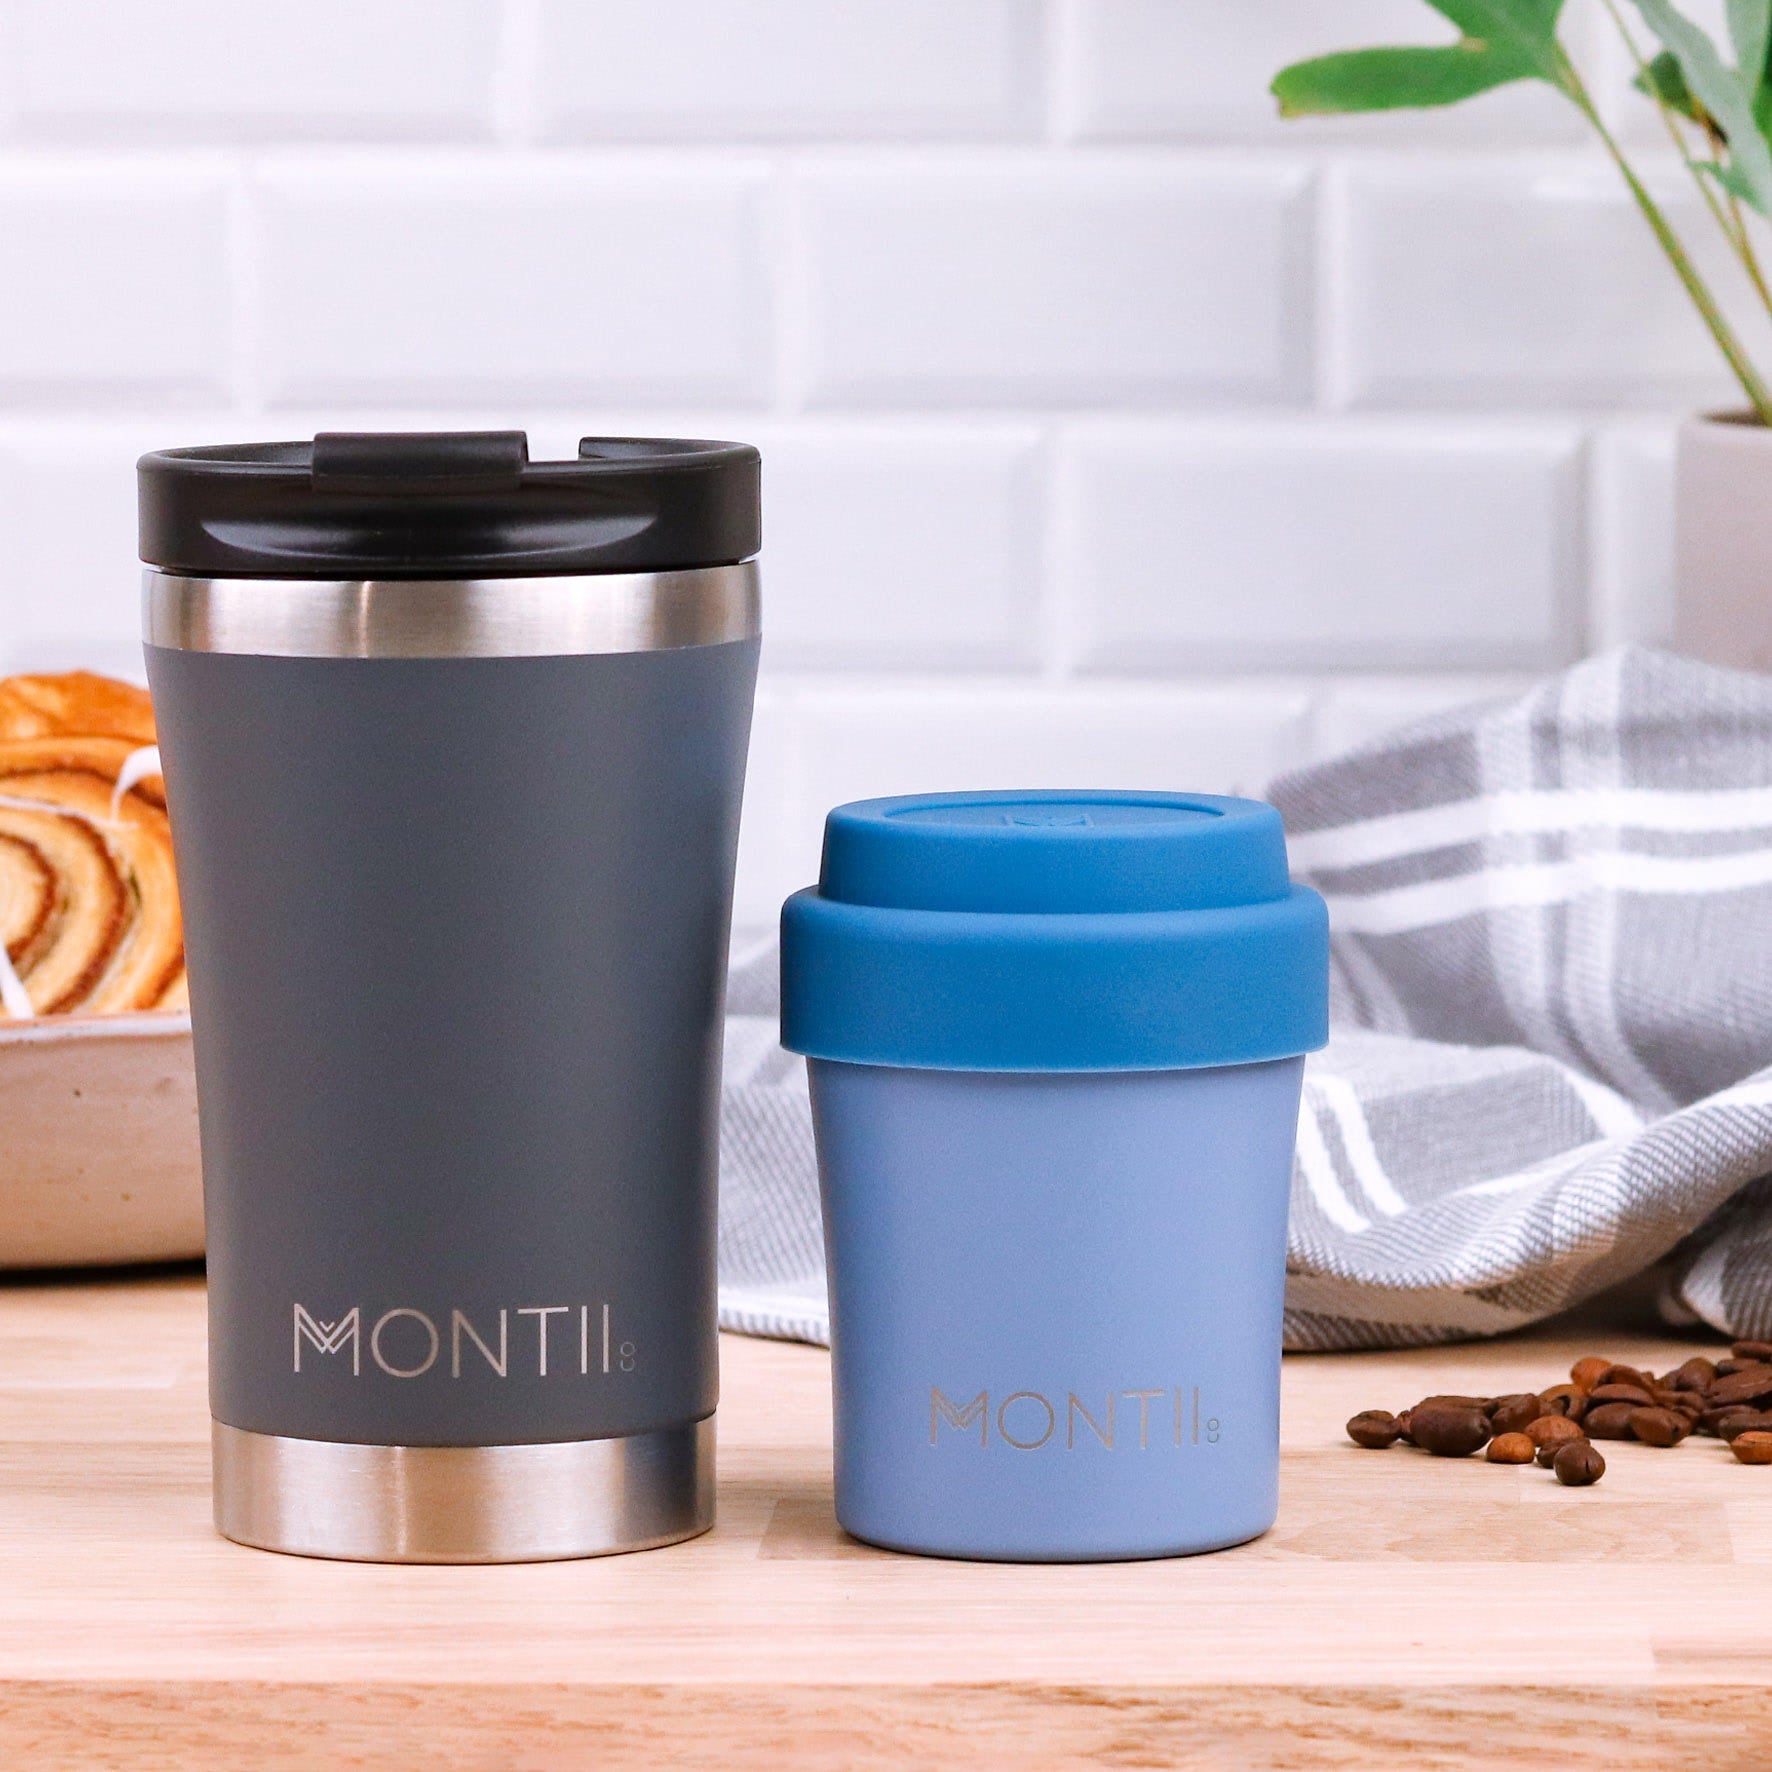 Montii Co Original Coffee Cup in Grey | 25% OFF | Children of the Wild